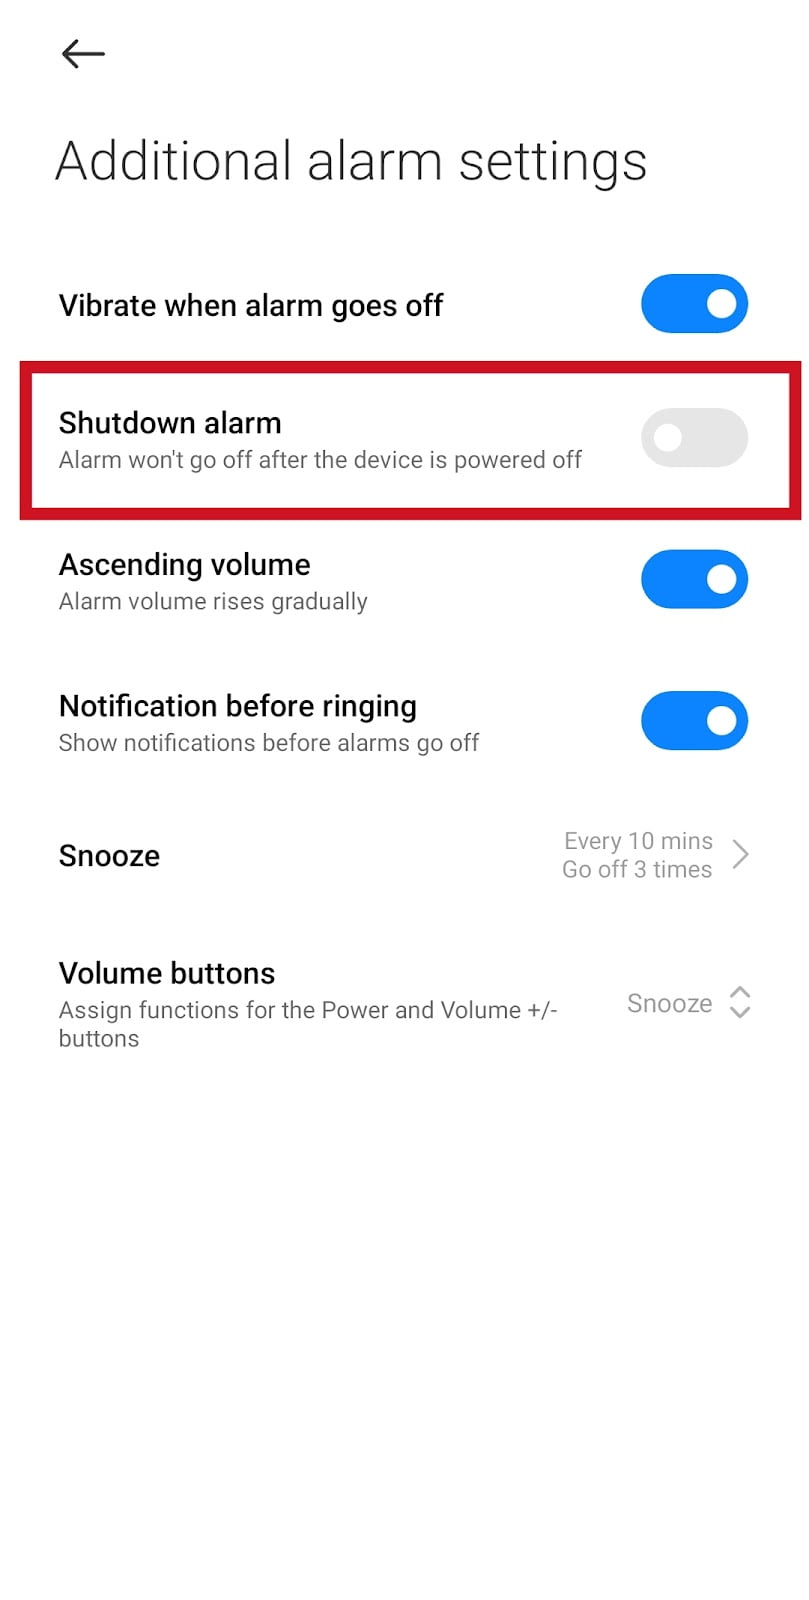 How to Enable Shutdown Alarm on Android 